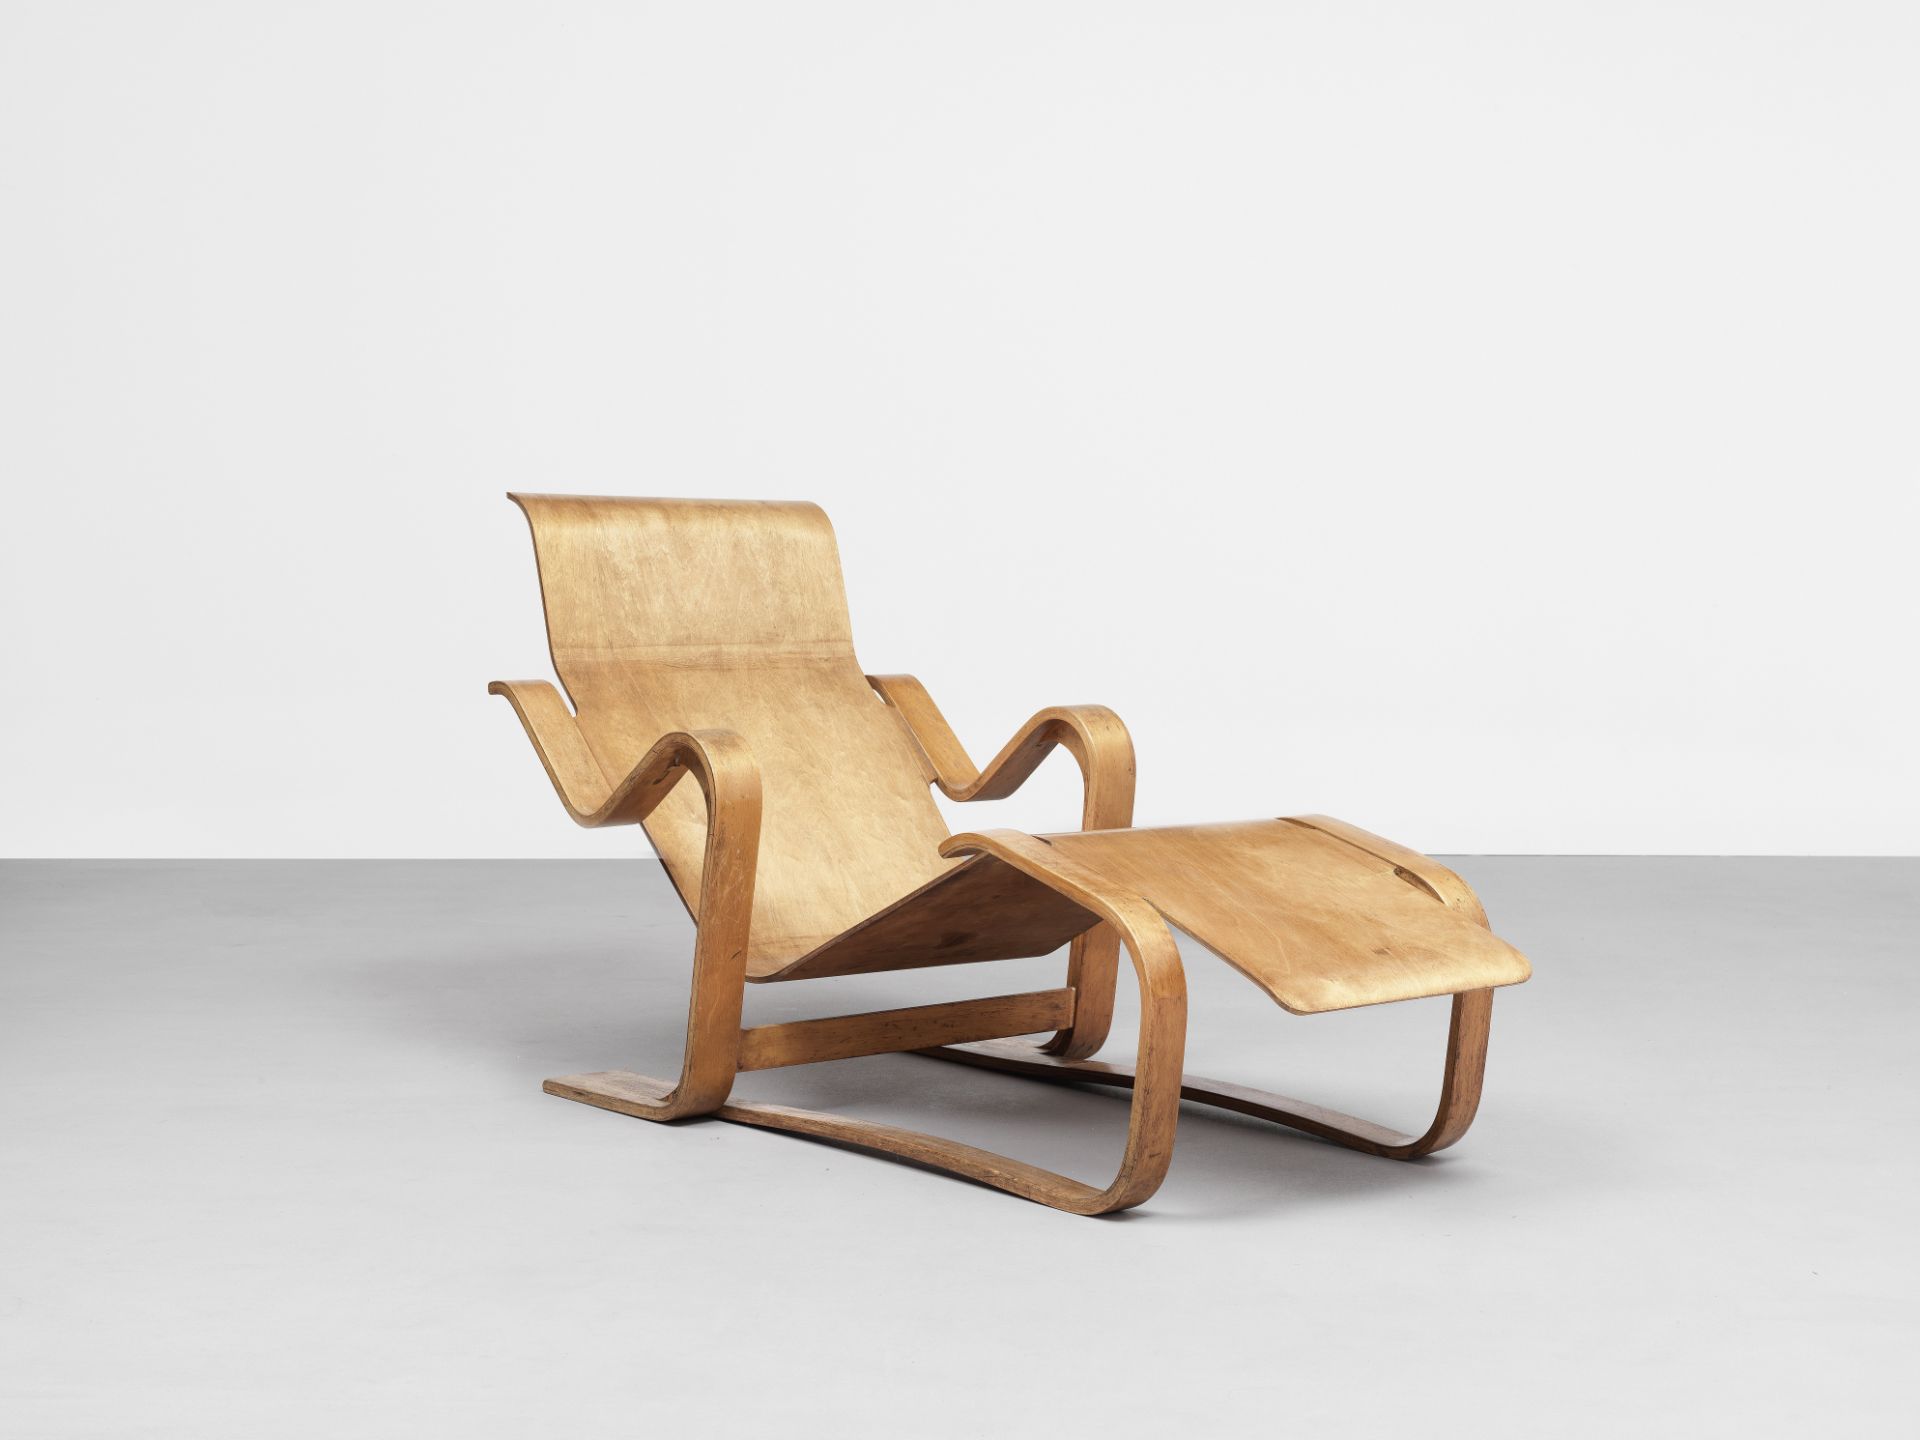 Marcel Breuer Early and rare 'Long Chair', designed 1935-1936, produced circa 1935